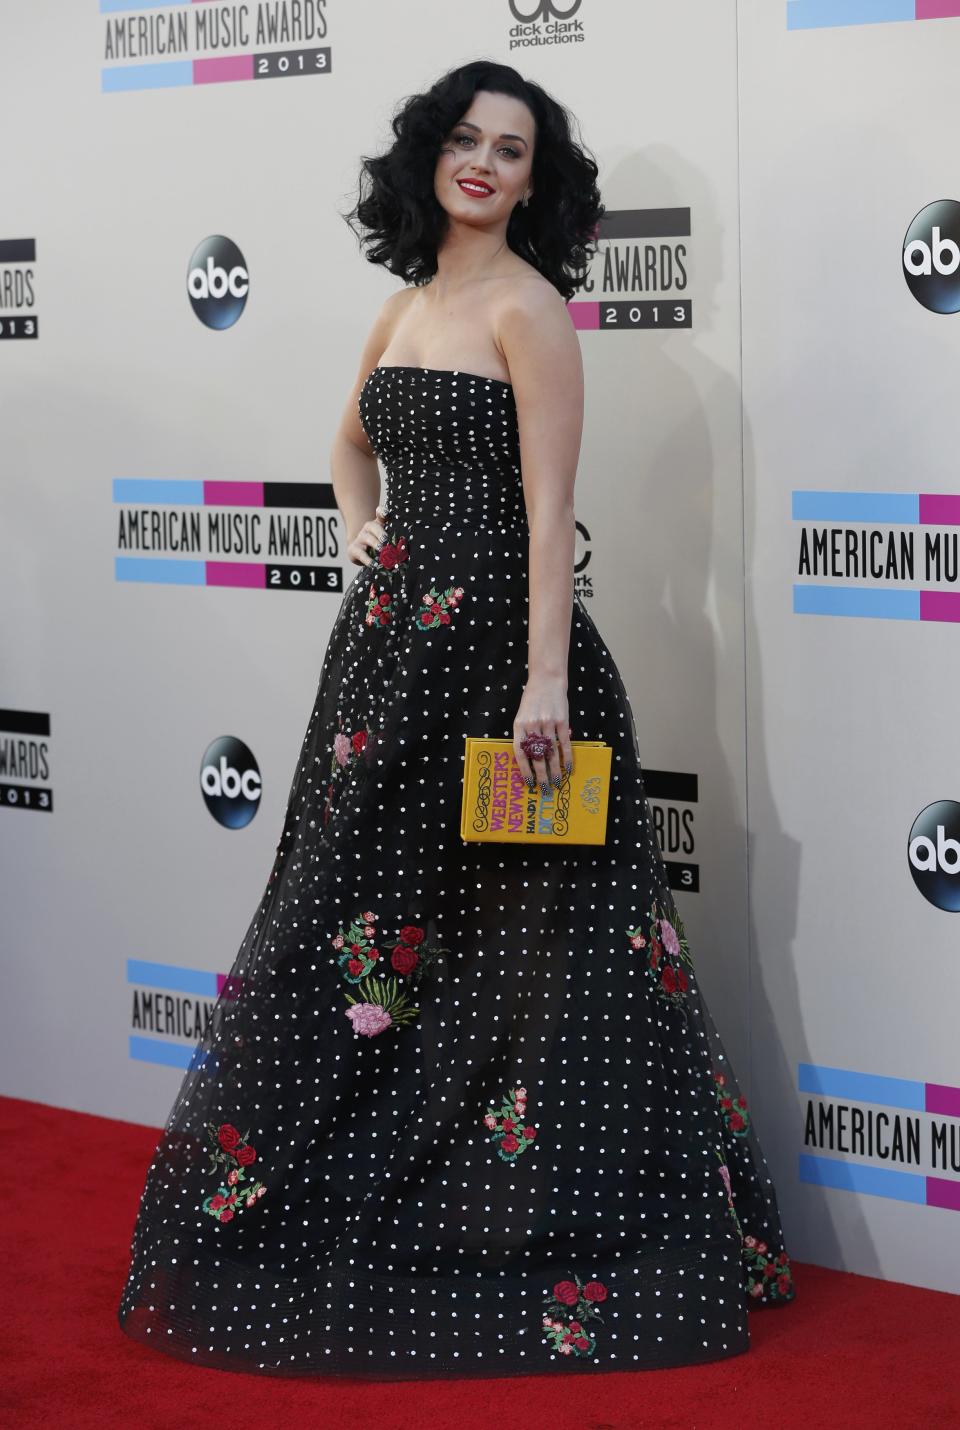 Singer Katy Perry arrives at the 41st American Music Awards in Los Angeles, California November 24, 2013. REUTERS/Mario Anzuoni (UNITED STATES - TAGS: ENTERTAINMENT)(AMA-ARRIVALS)